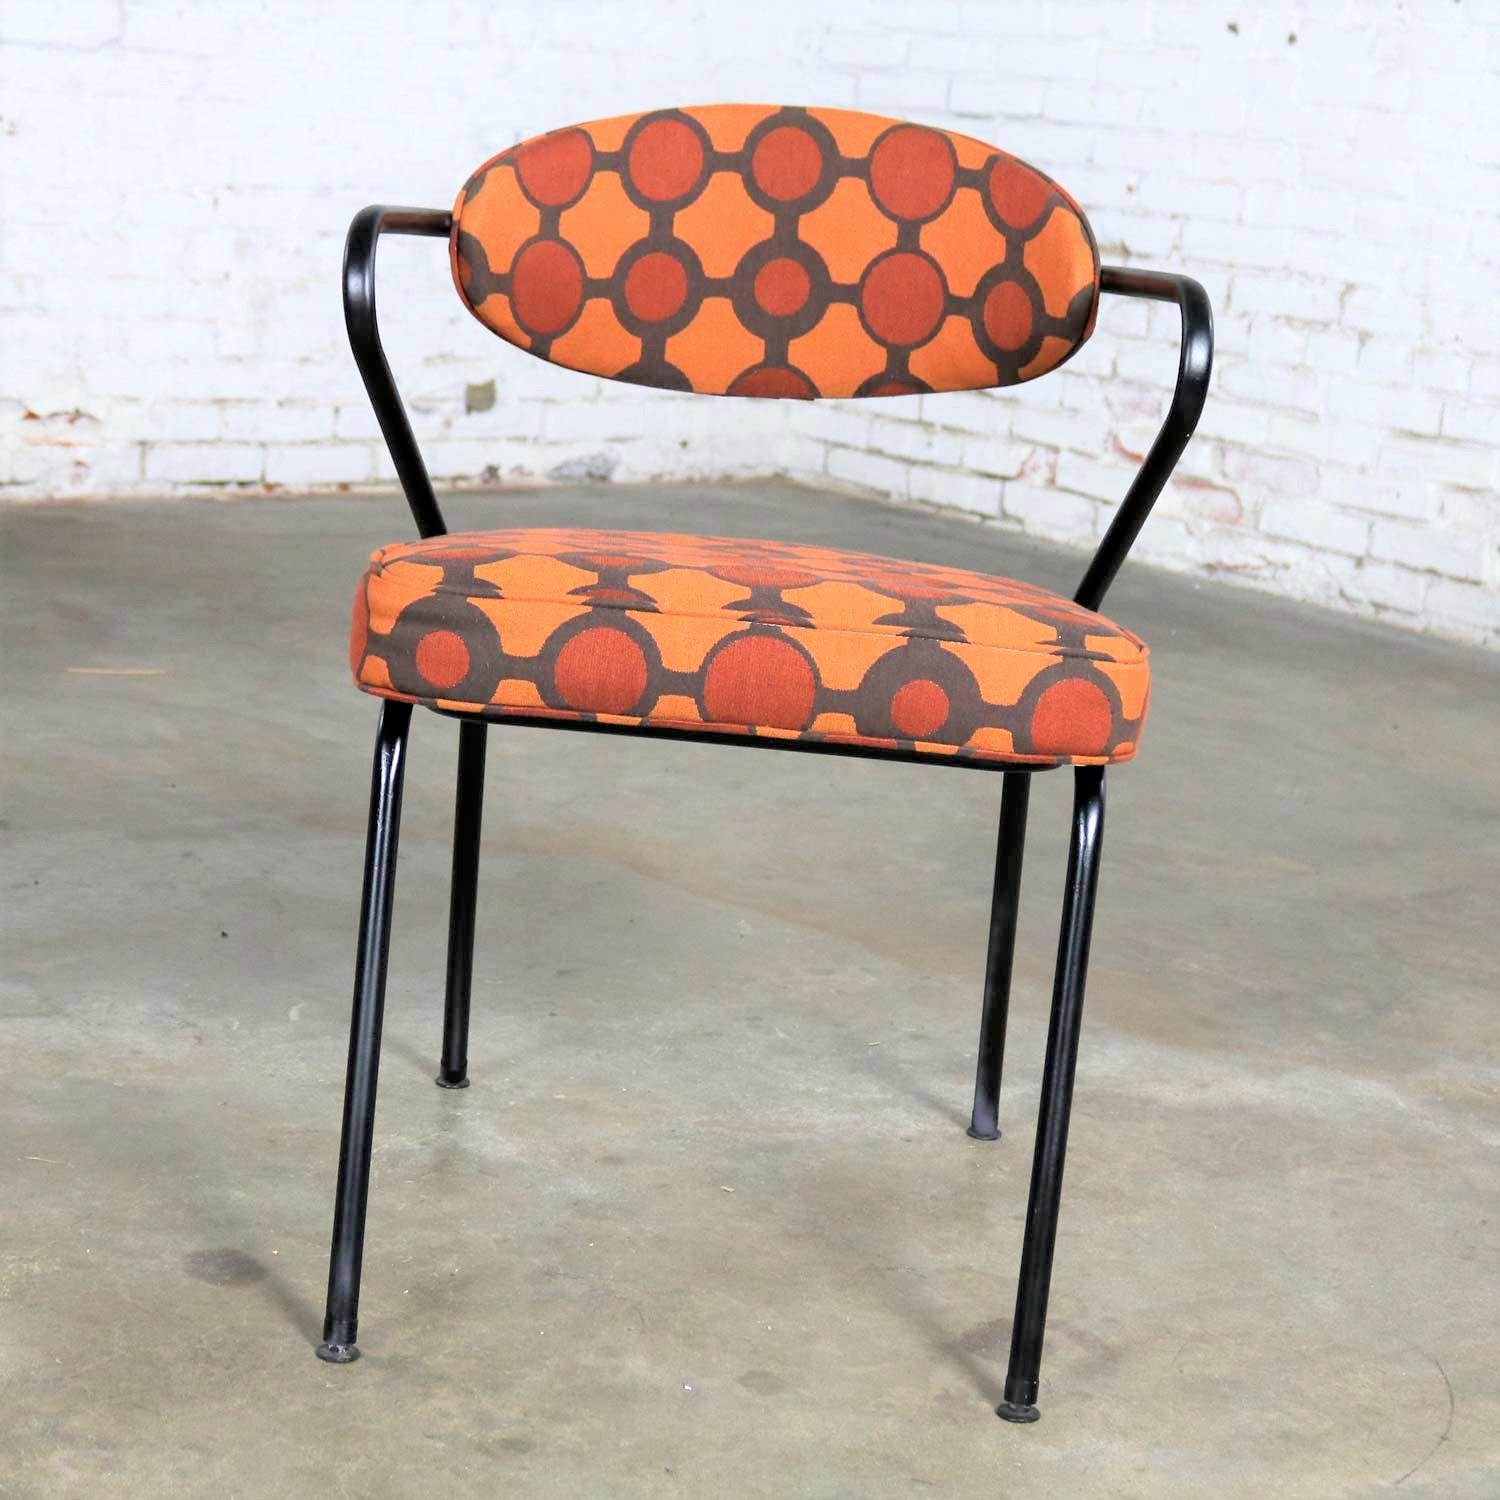 Handsome Mid-Century Modern armchair made of bent steel tube painted black and newly upholstered in an orange contemporary geometric fabric. It is in wonderful restored condition and ready to use. Please see photos, circa 1950s.

Sometimes you